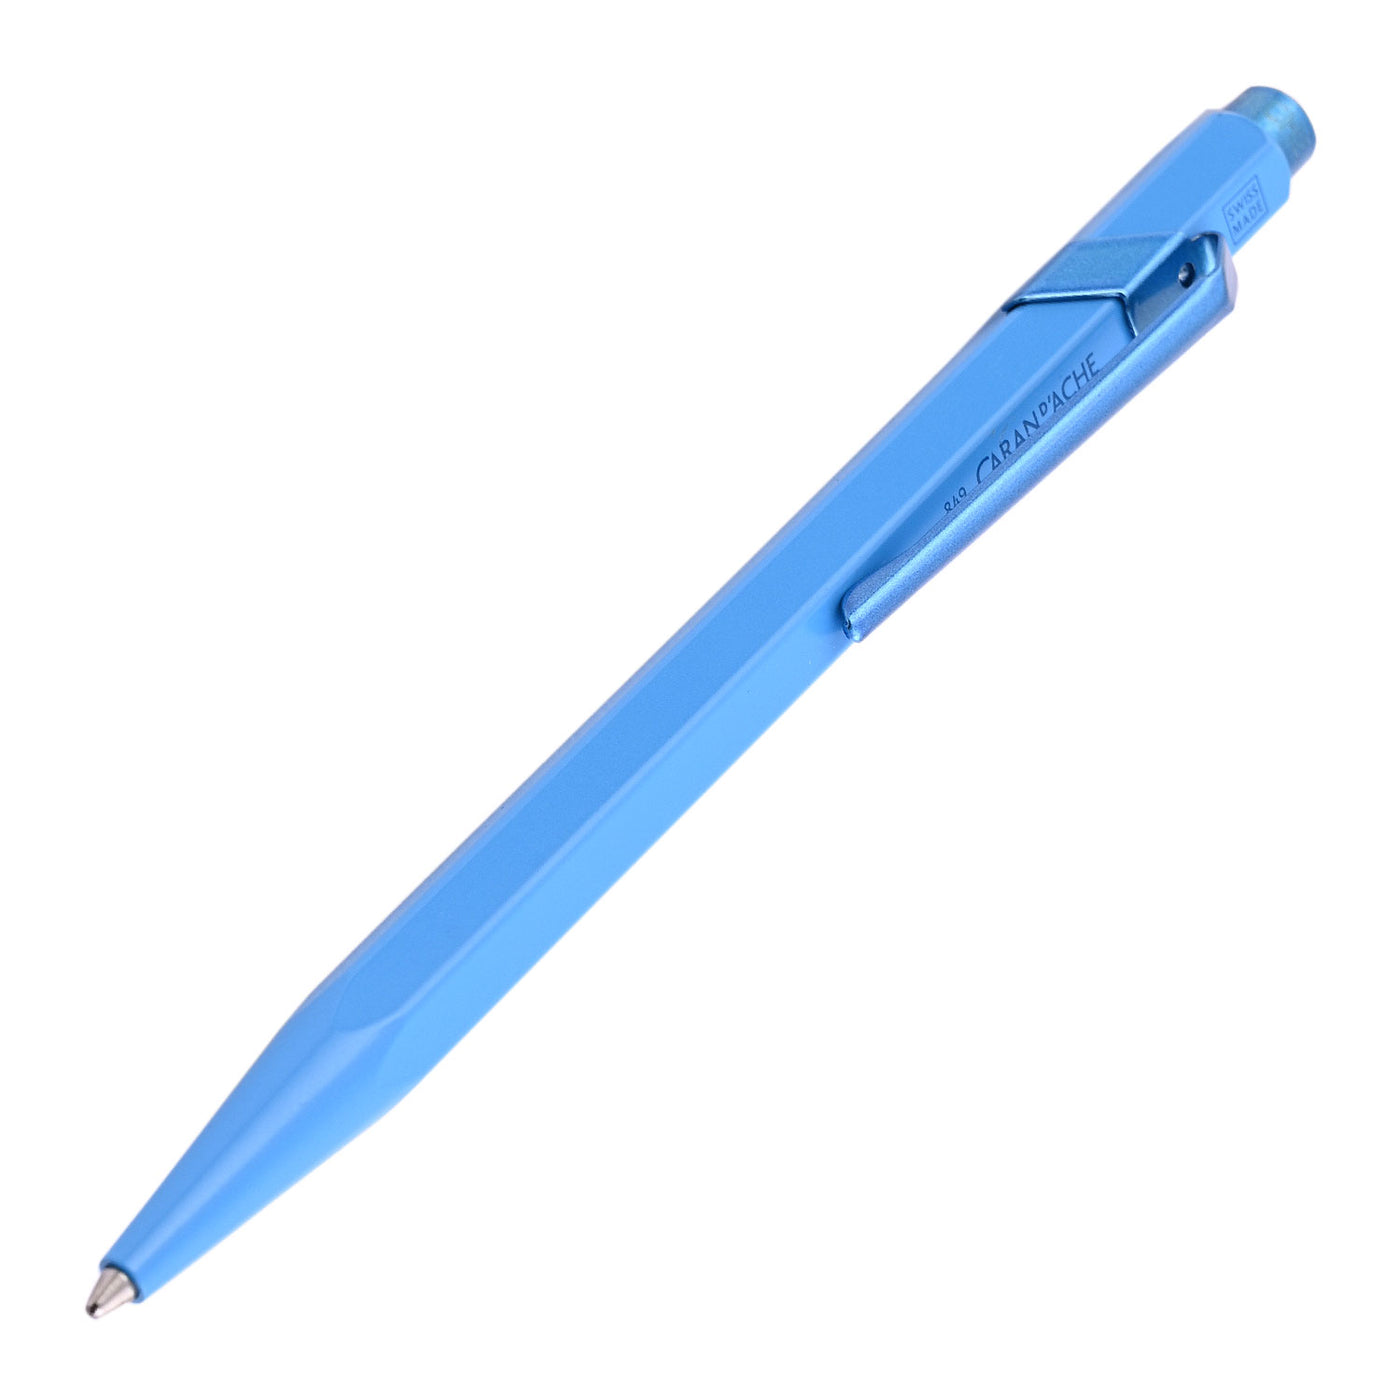 Caran d'Ache 849 Claim Your Style Ball Pen - Azure Blue (Limited Edition) 1